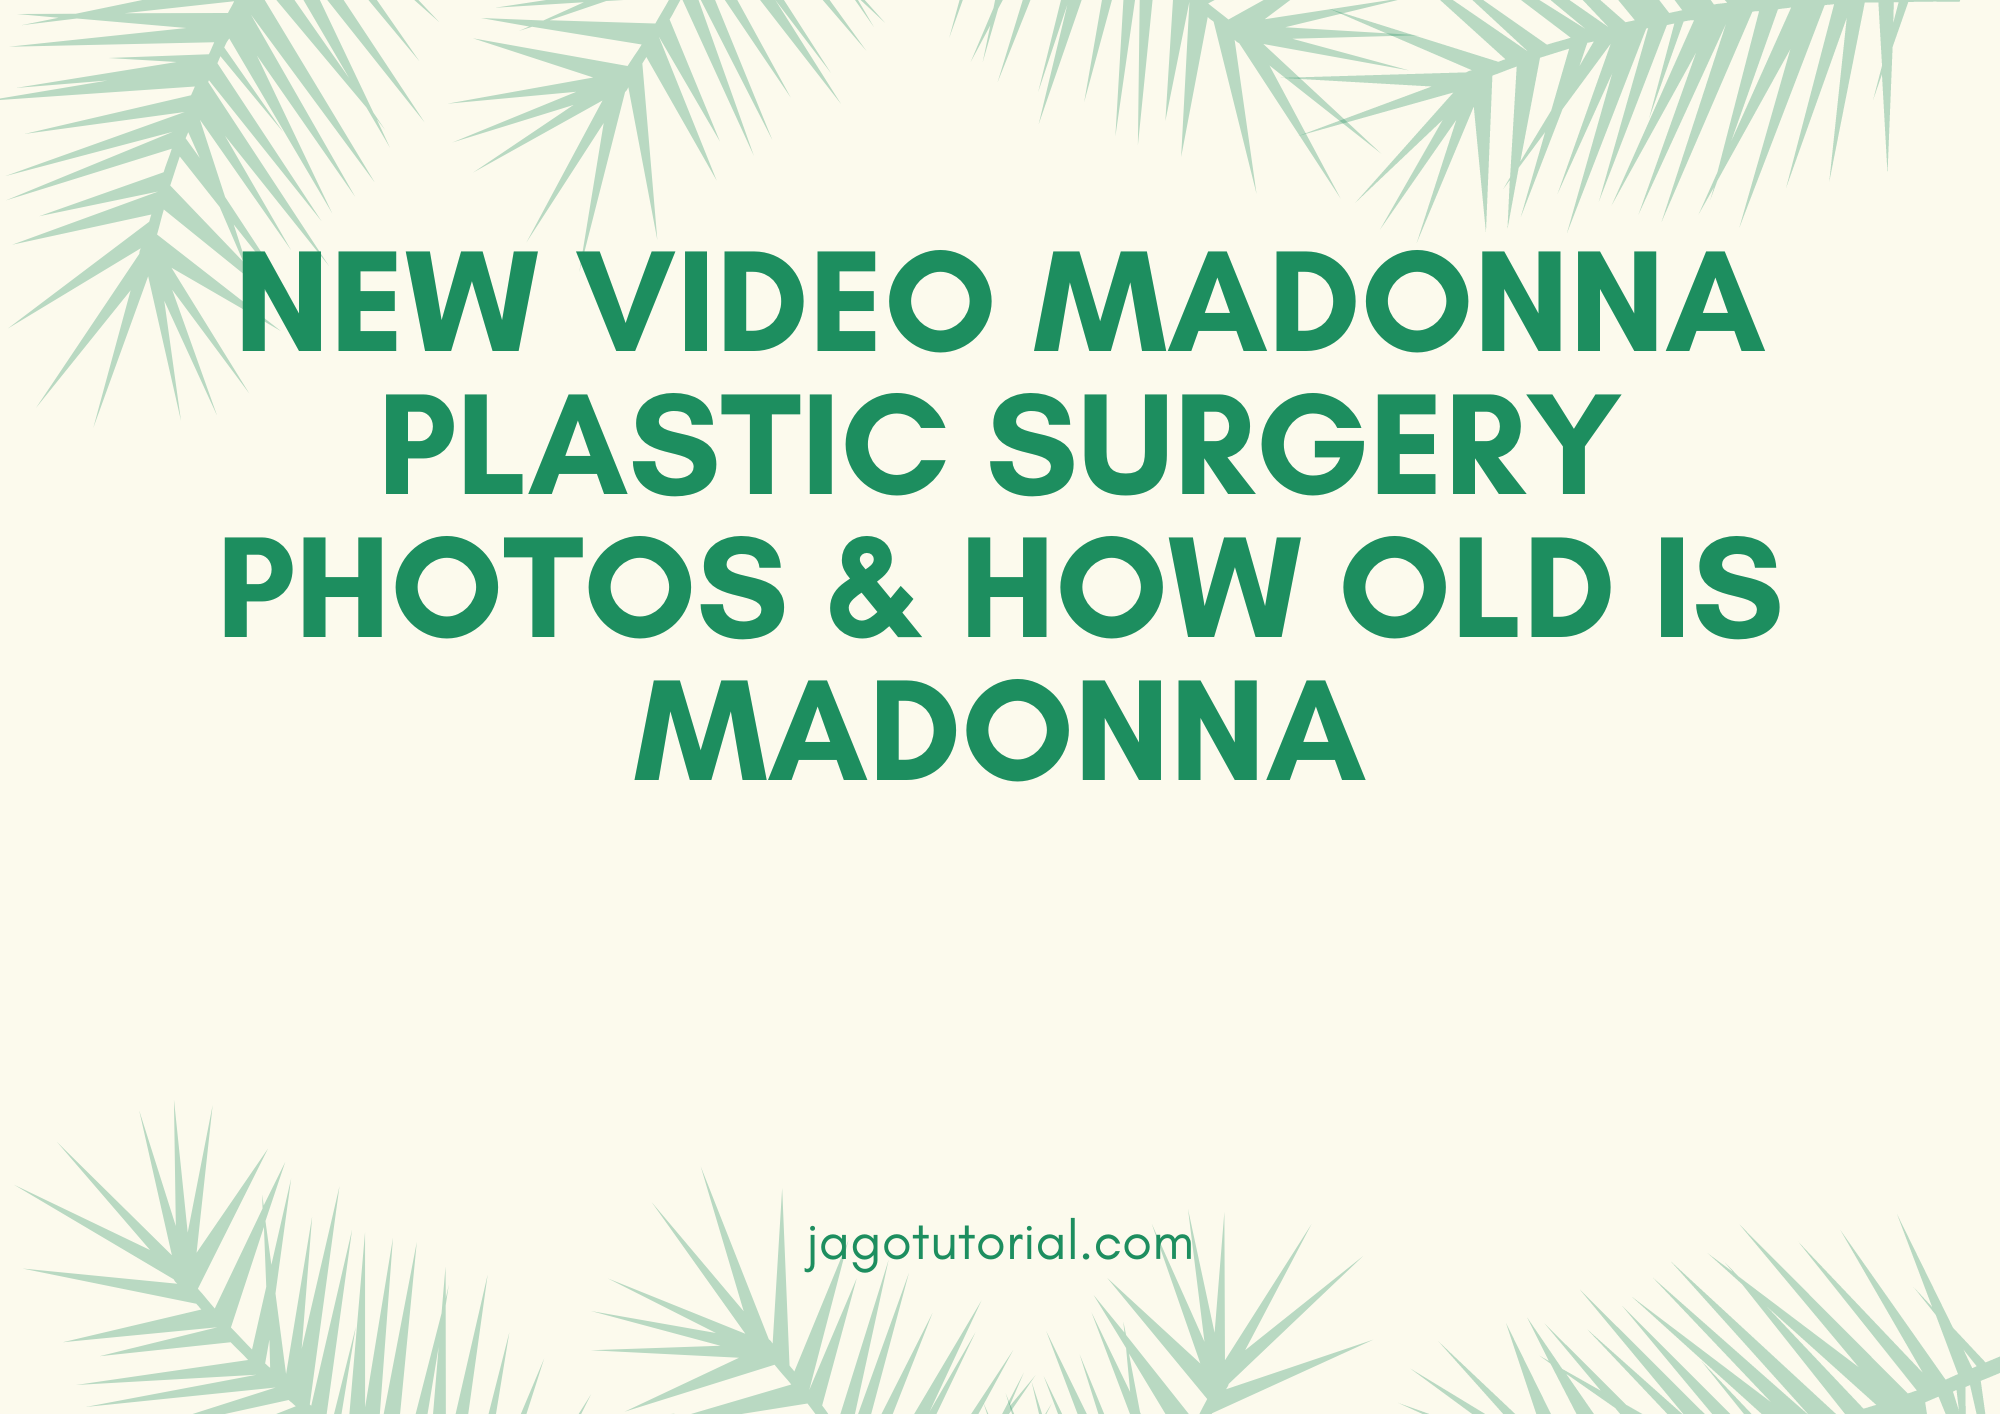 NEW VIDEO Madonna Plastic Surgery Photos & How Old is Madonna